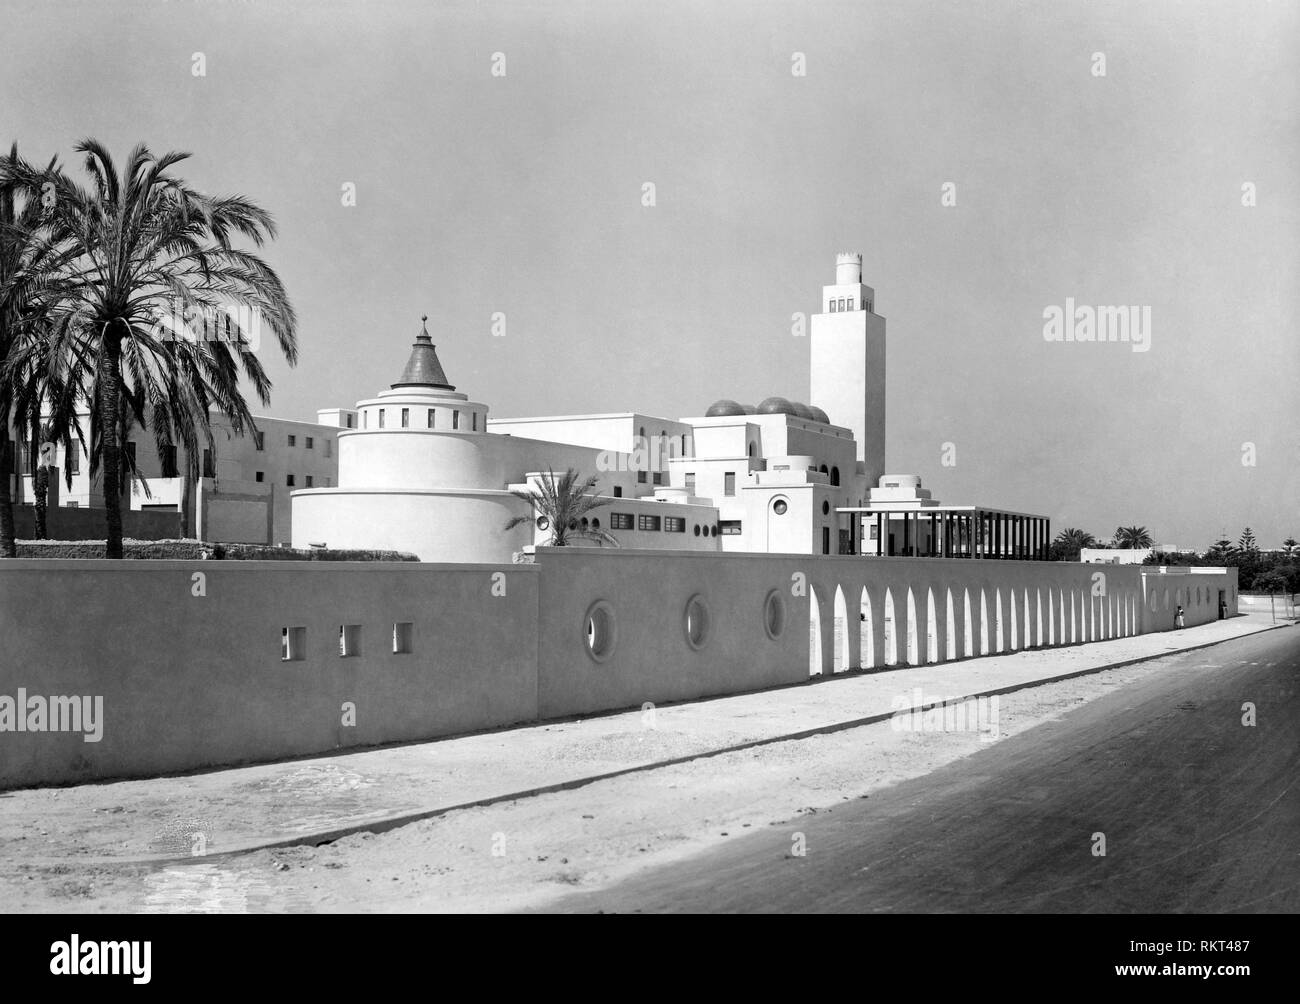 Libia, Tripoli, uaddan hotel Banque D'Images